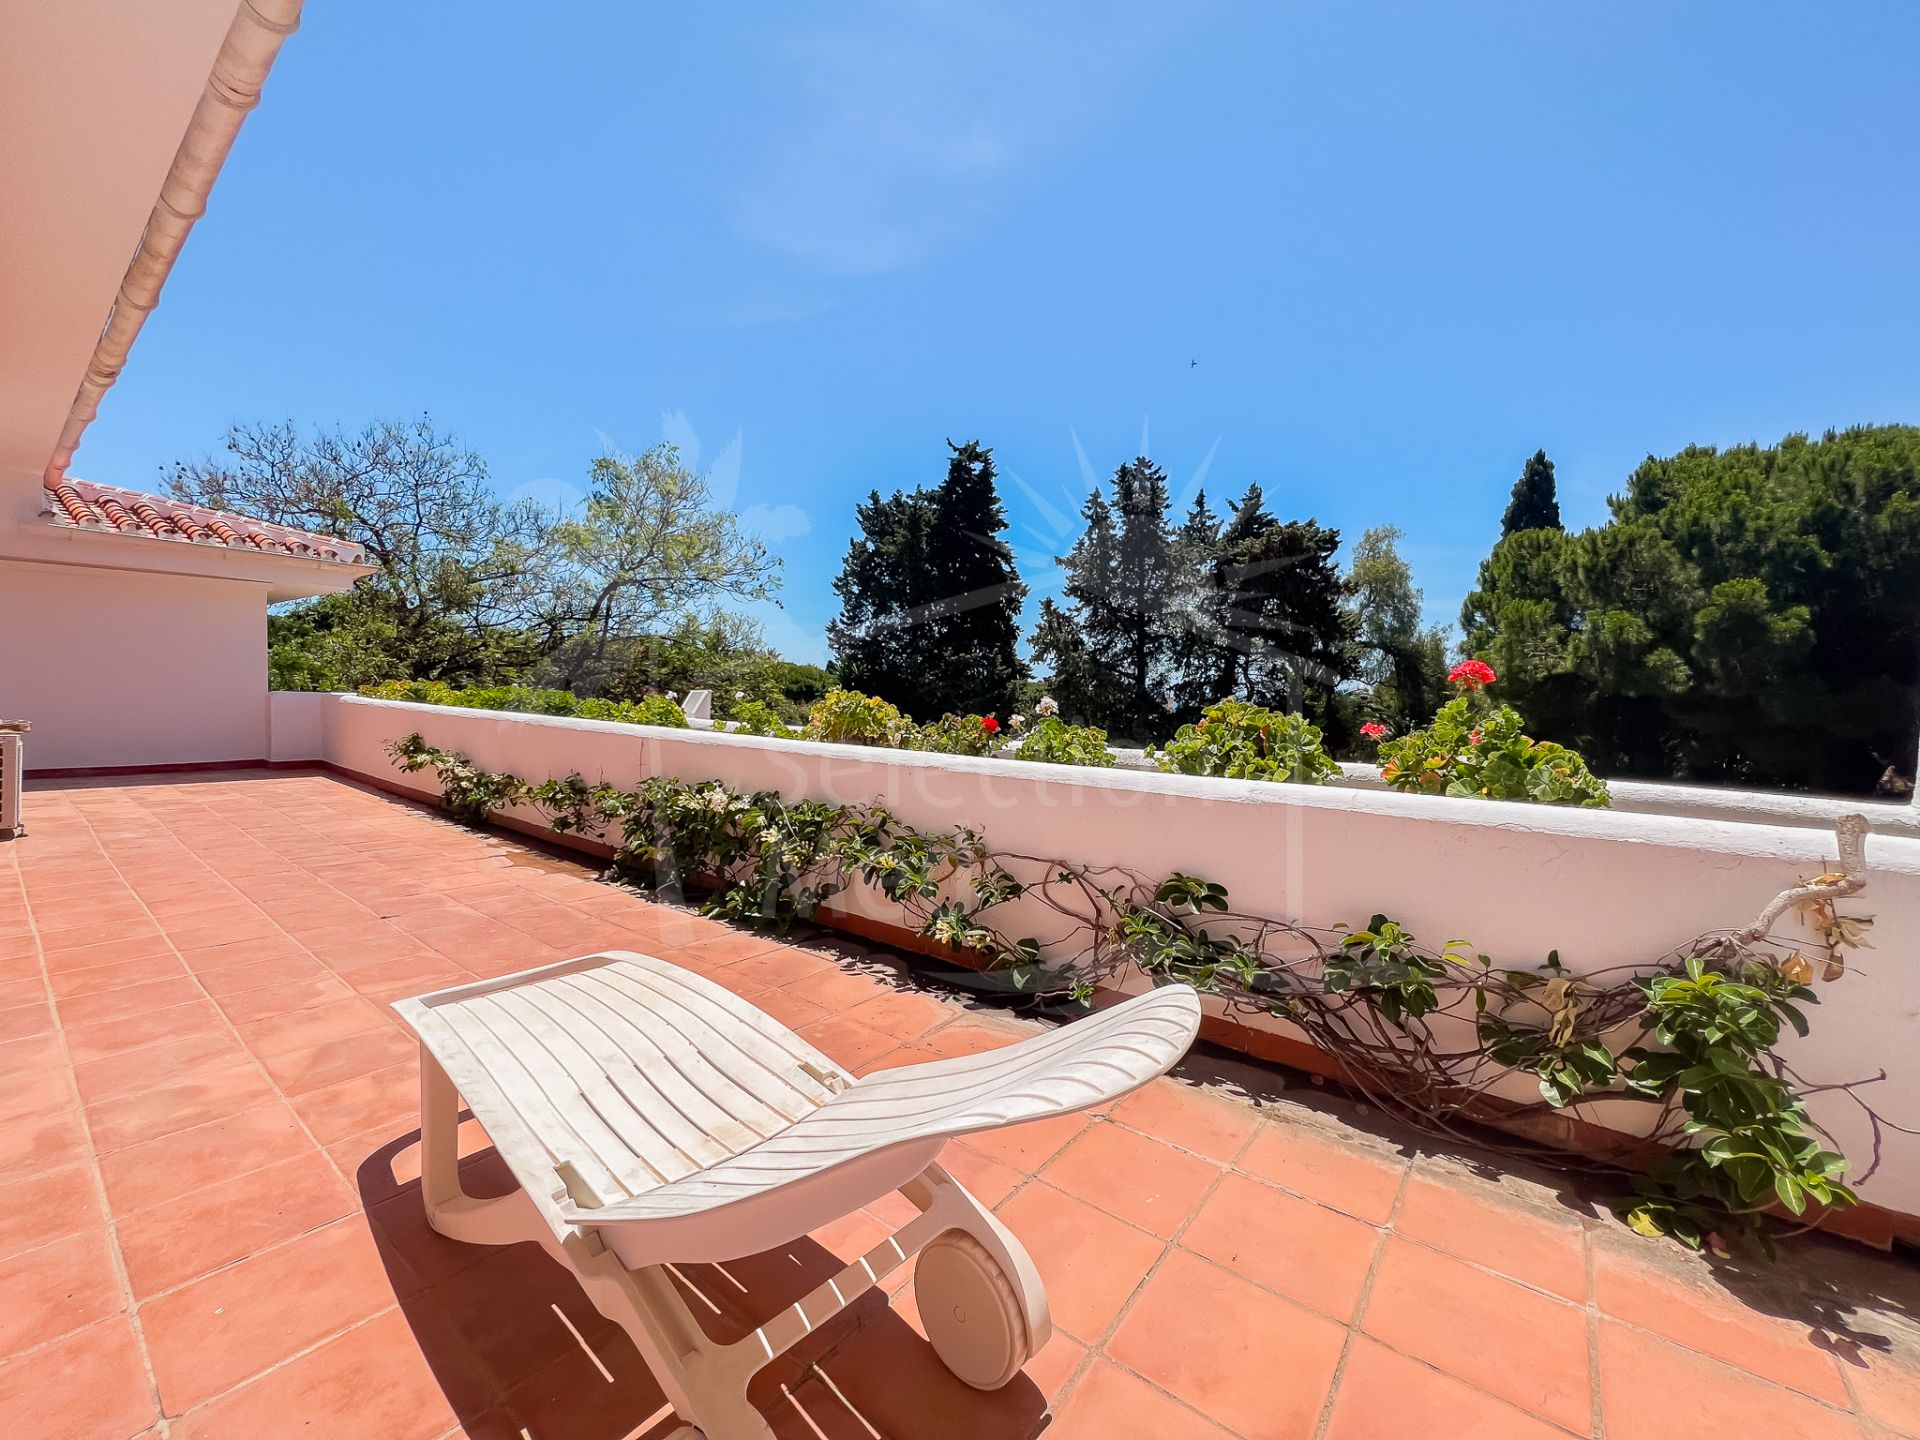 Luxury 7 Bedroom Villa with Private Pool and Tennis Court in Calahonda, Mijas Costa, Malaga